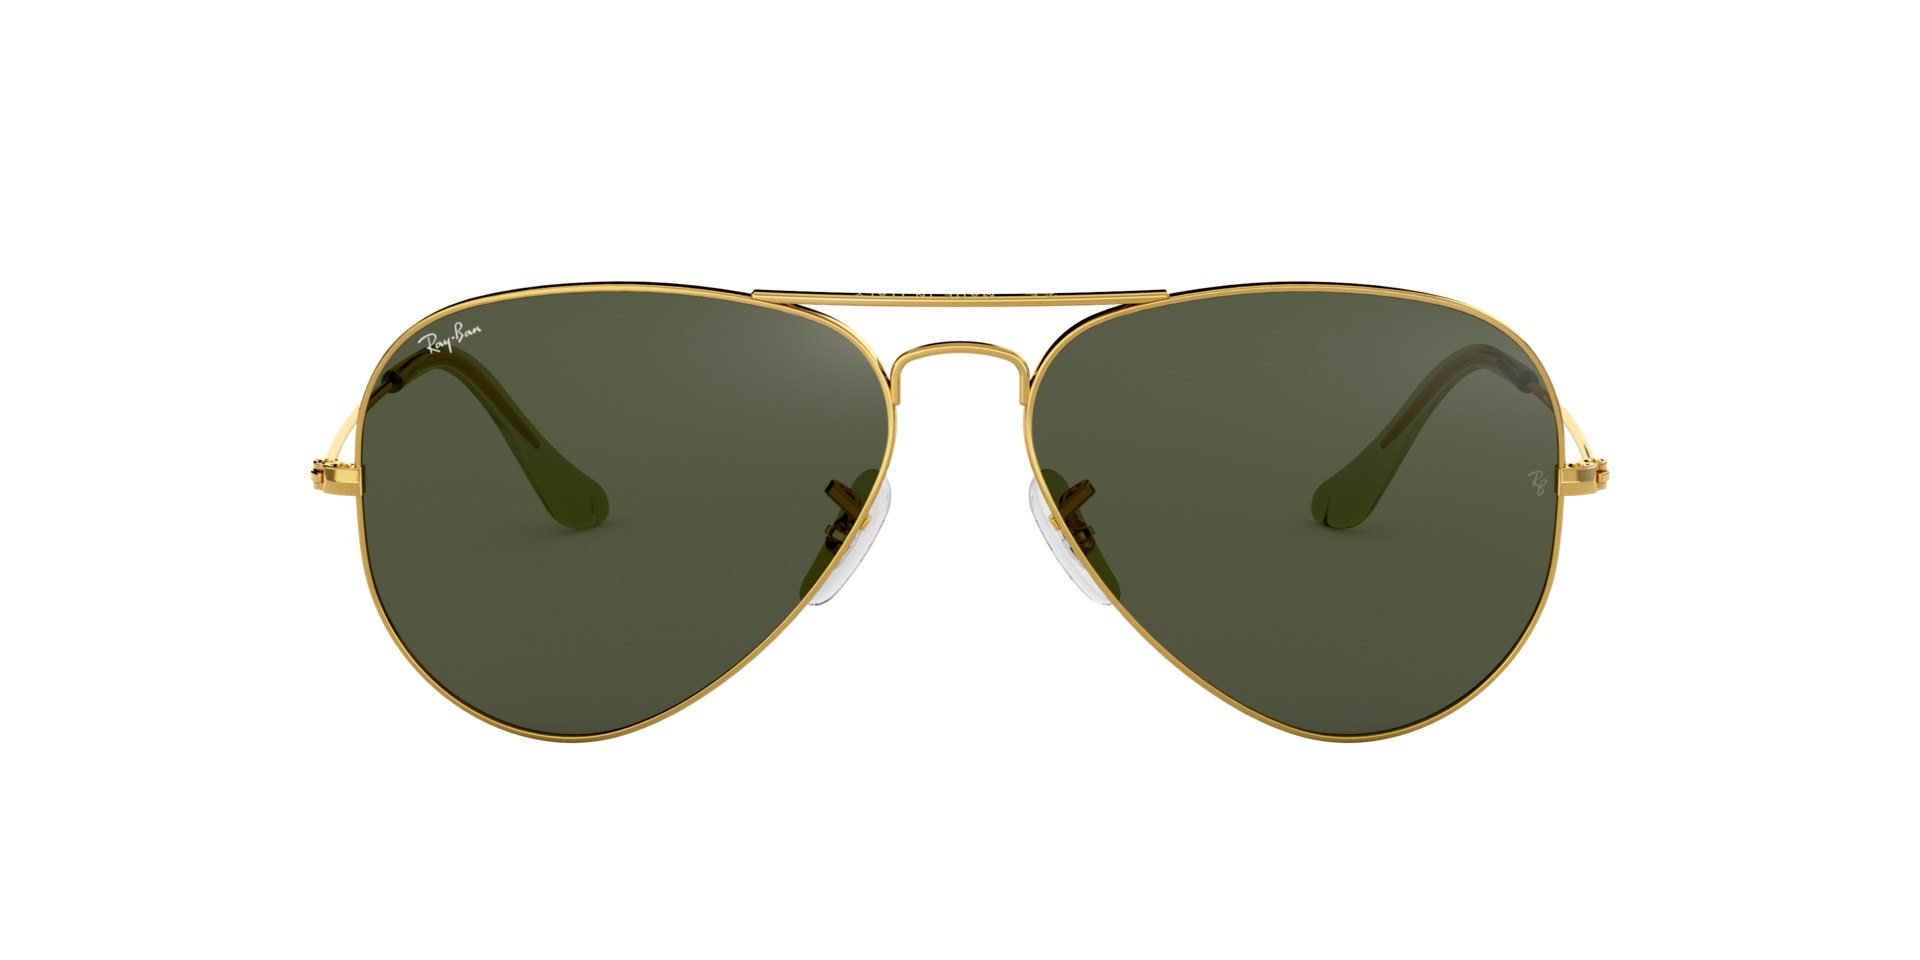 Ray Ban Aviator Large Metal Sonnenbrille in Gold RB3025 L0205 58